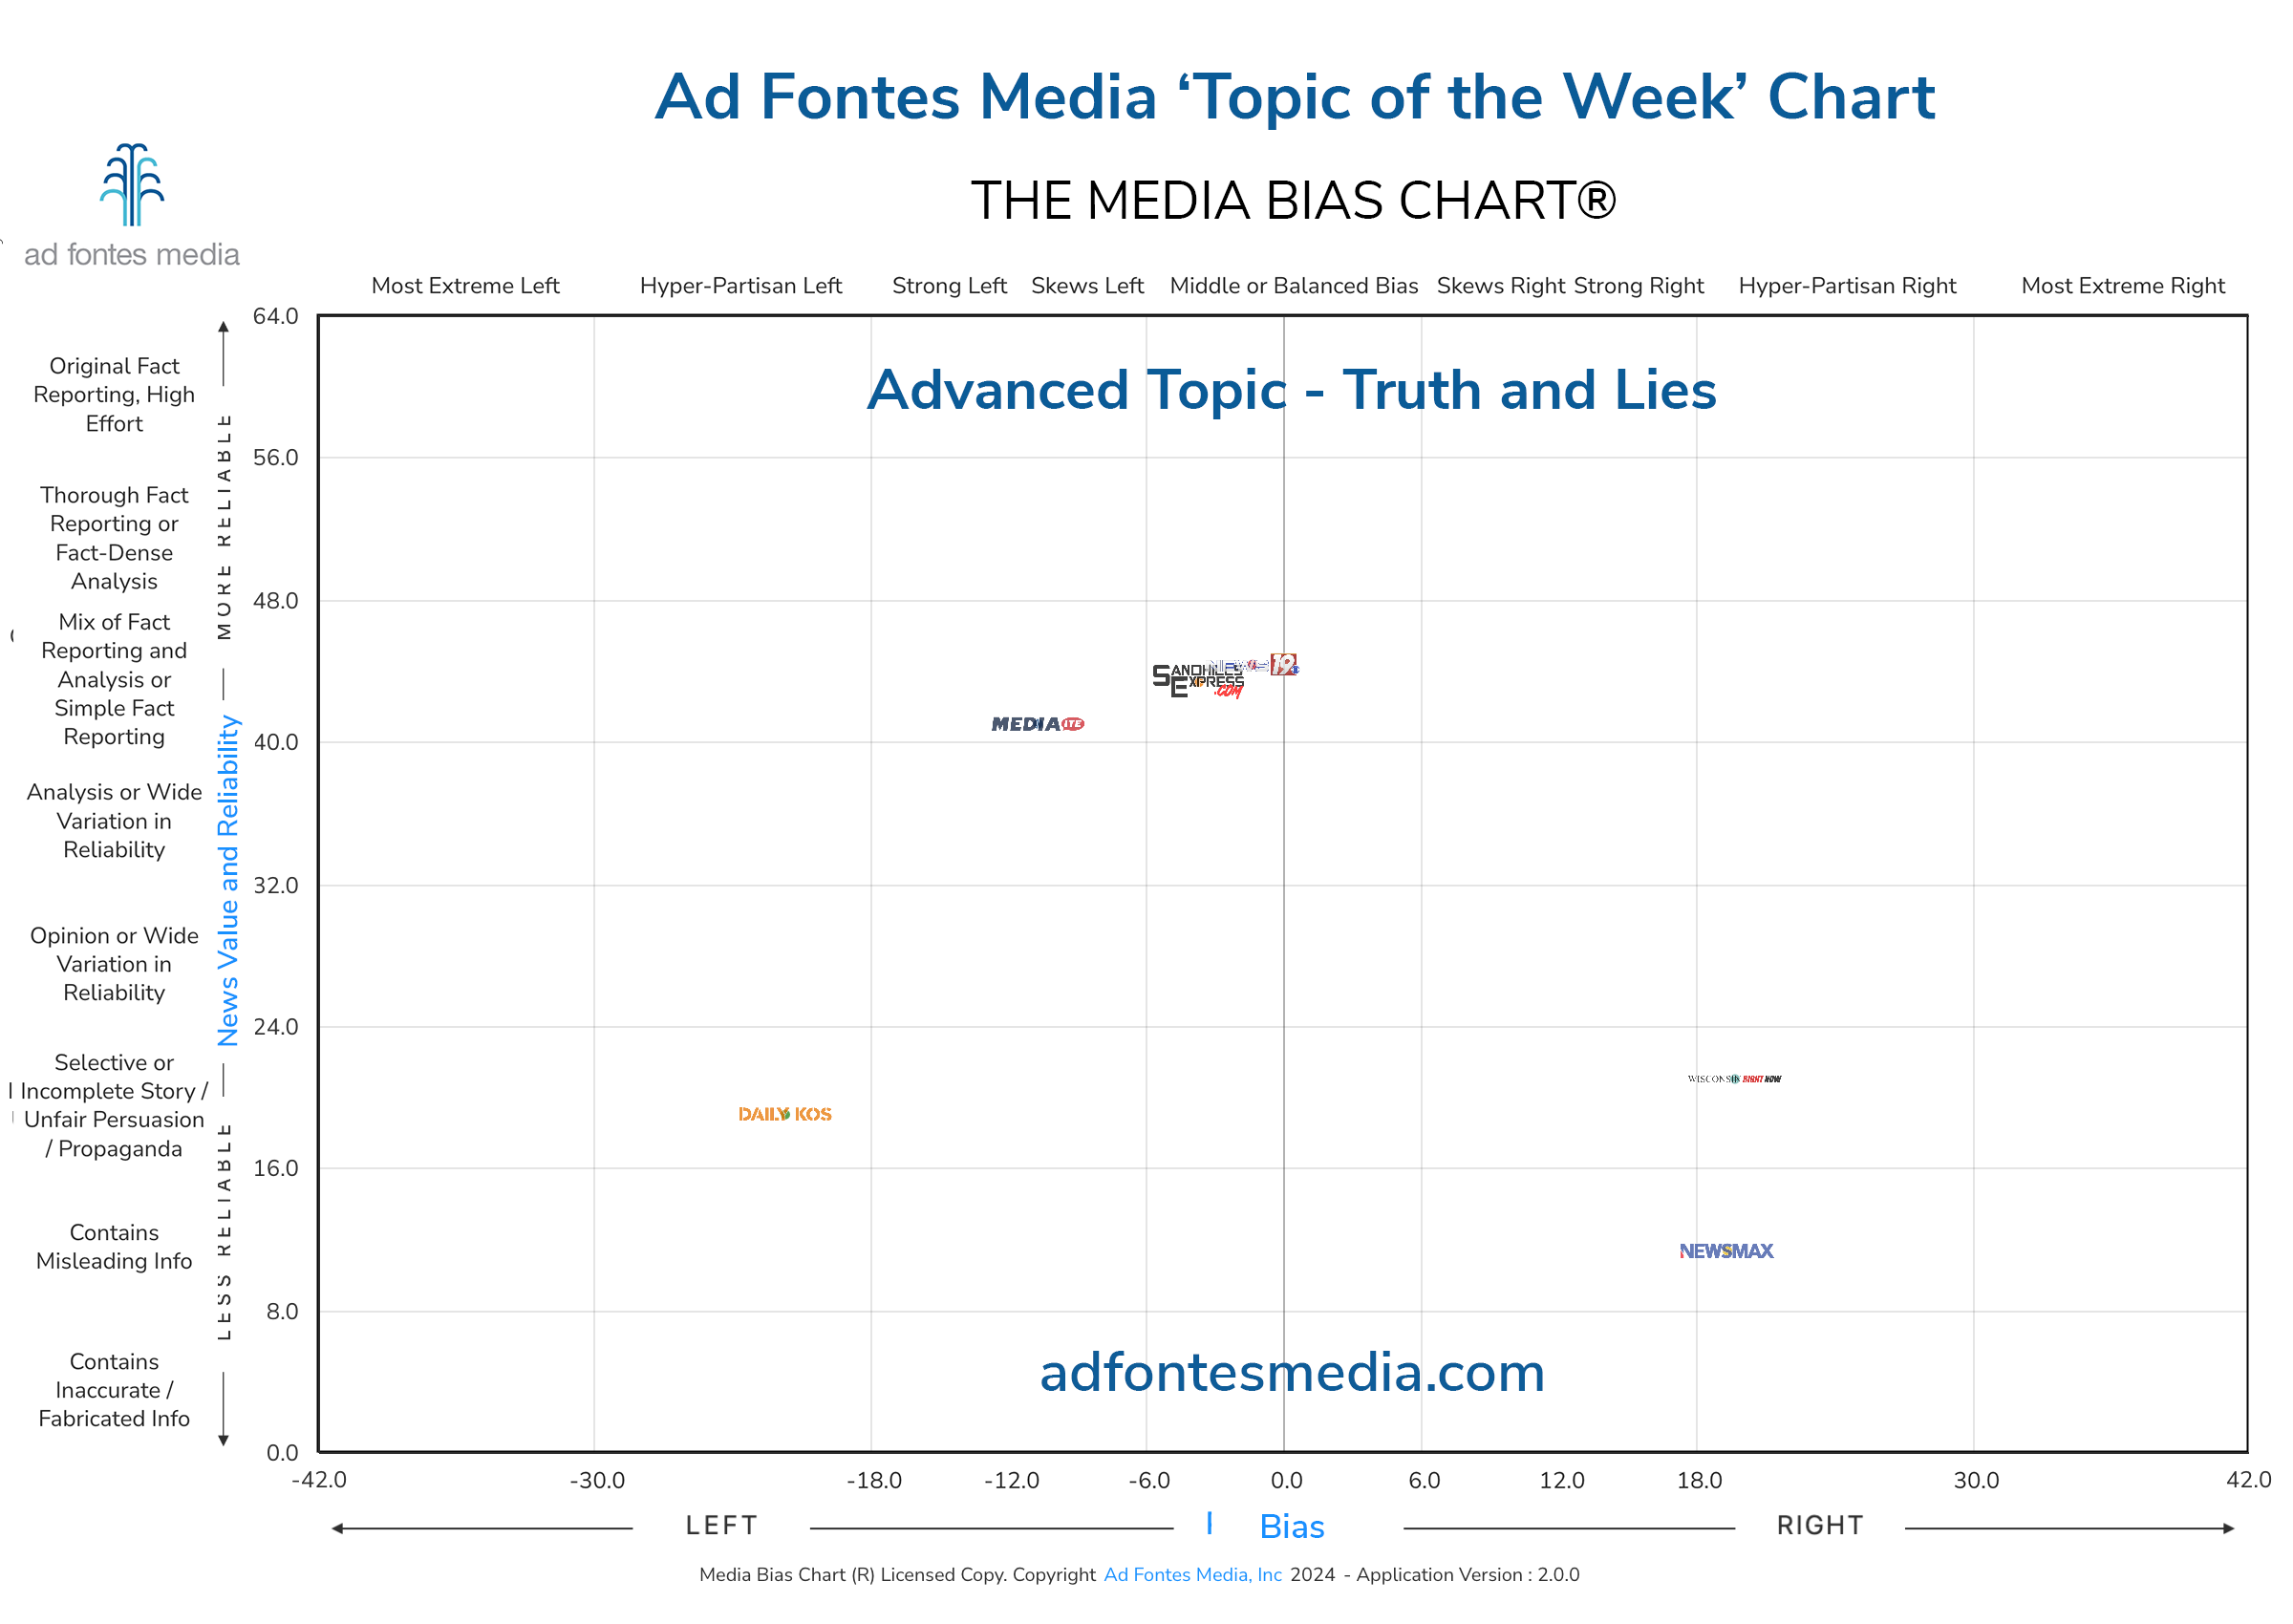 The Media Bias Chart takes a look at articles covering Donald Trump’s assertion that he will be prevented from attending son’s high school graduation.